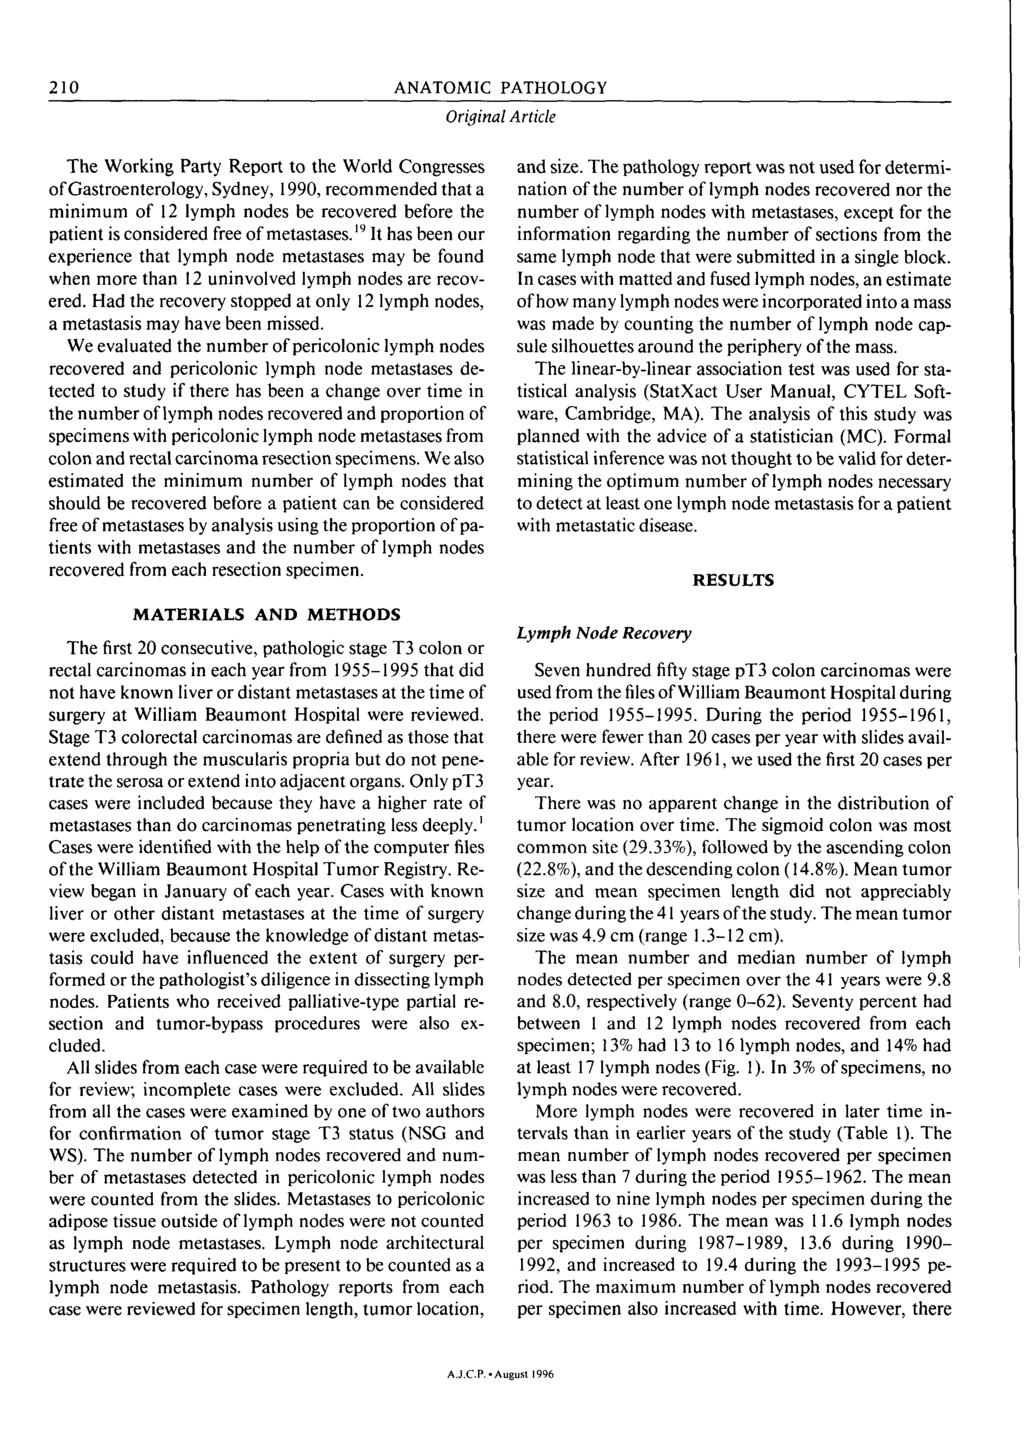 210 ANATOMIC PATHOLOGY Article The Working Party Report to the World Congresses of Gastroenterology, Sydney, 1990, recommended that a minimum of 12 lymph nodes be recovered before the patient is